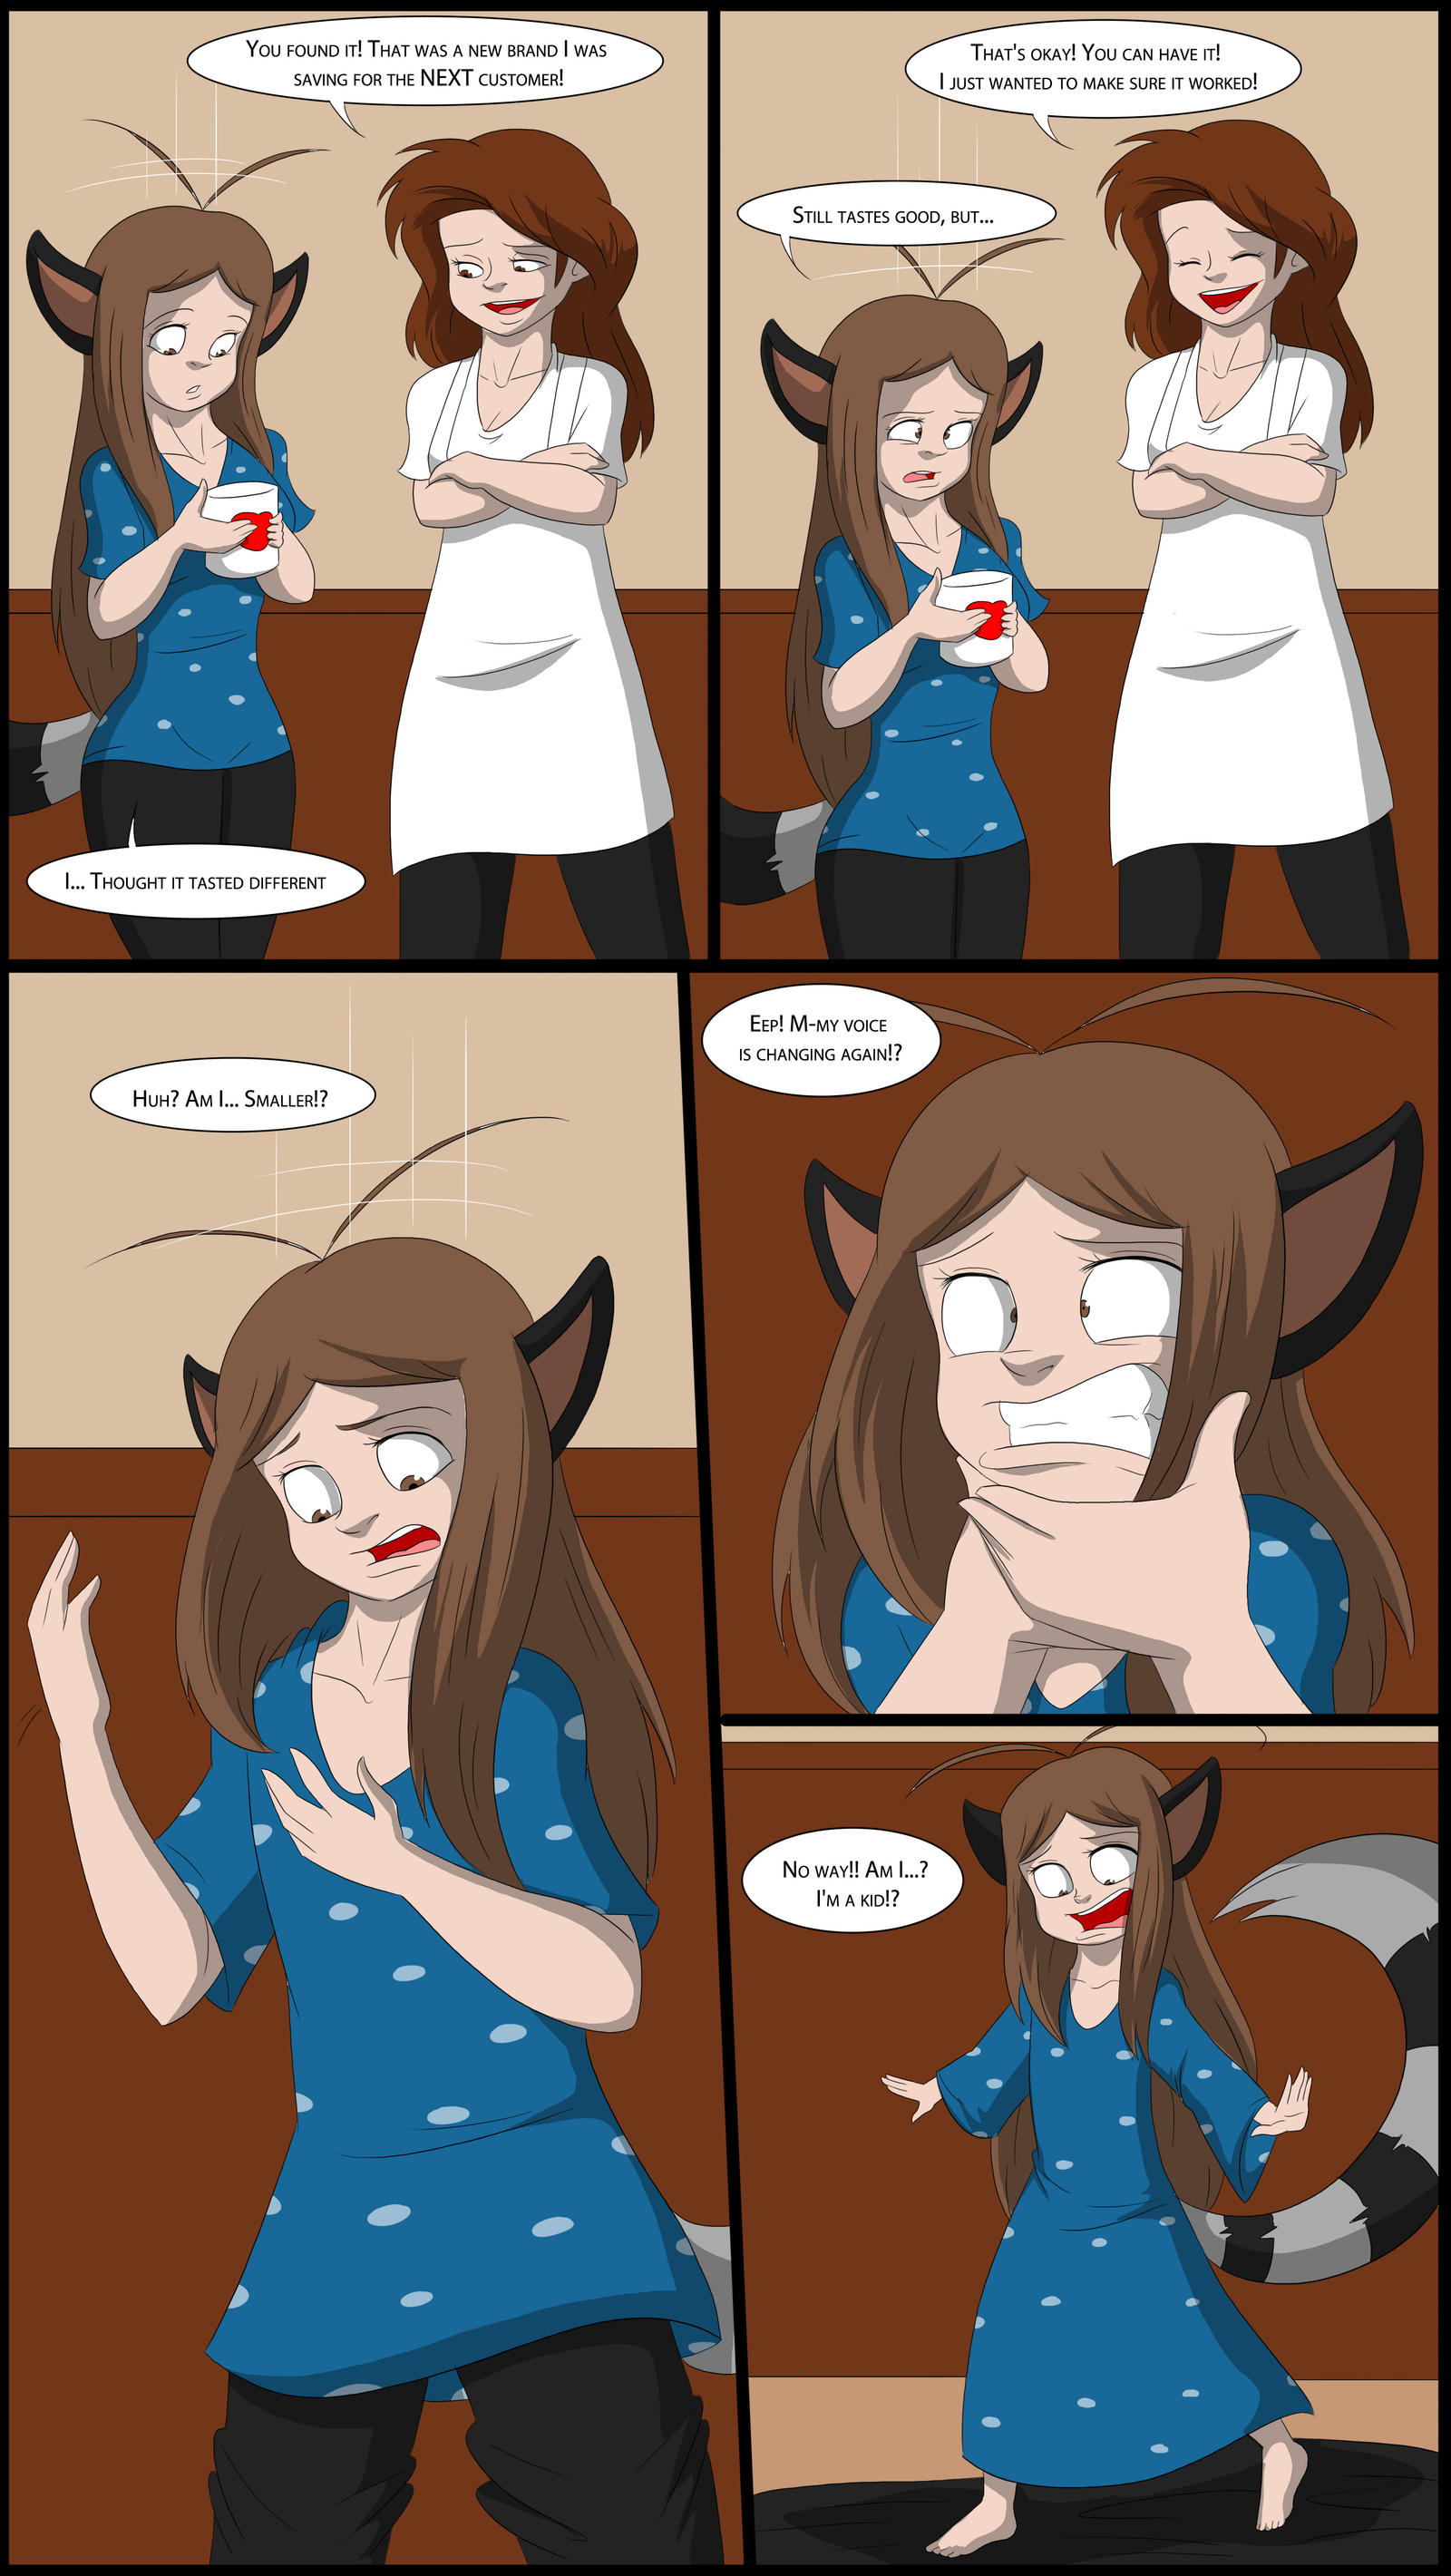 Coffee Shop Girl TG/TF/AR Page 6 by TFSubmissions on DeviantArt